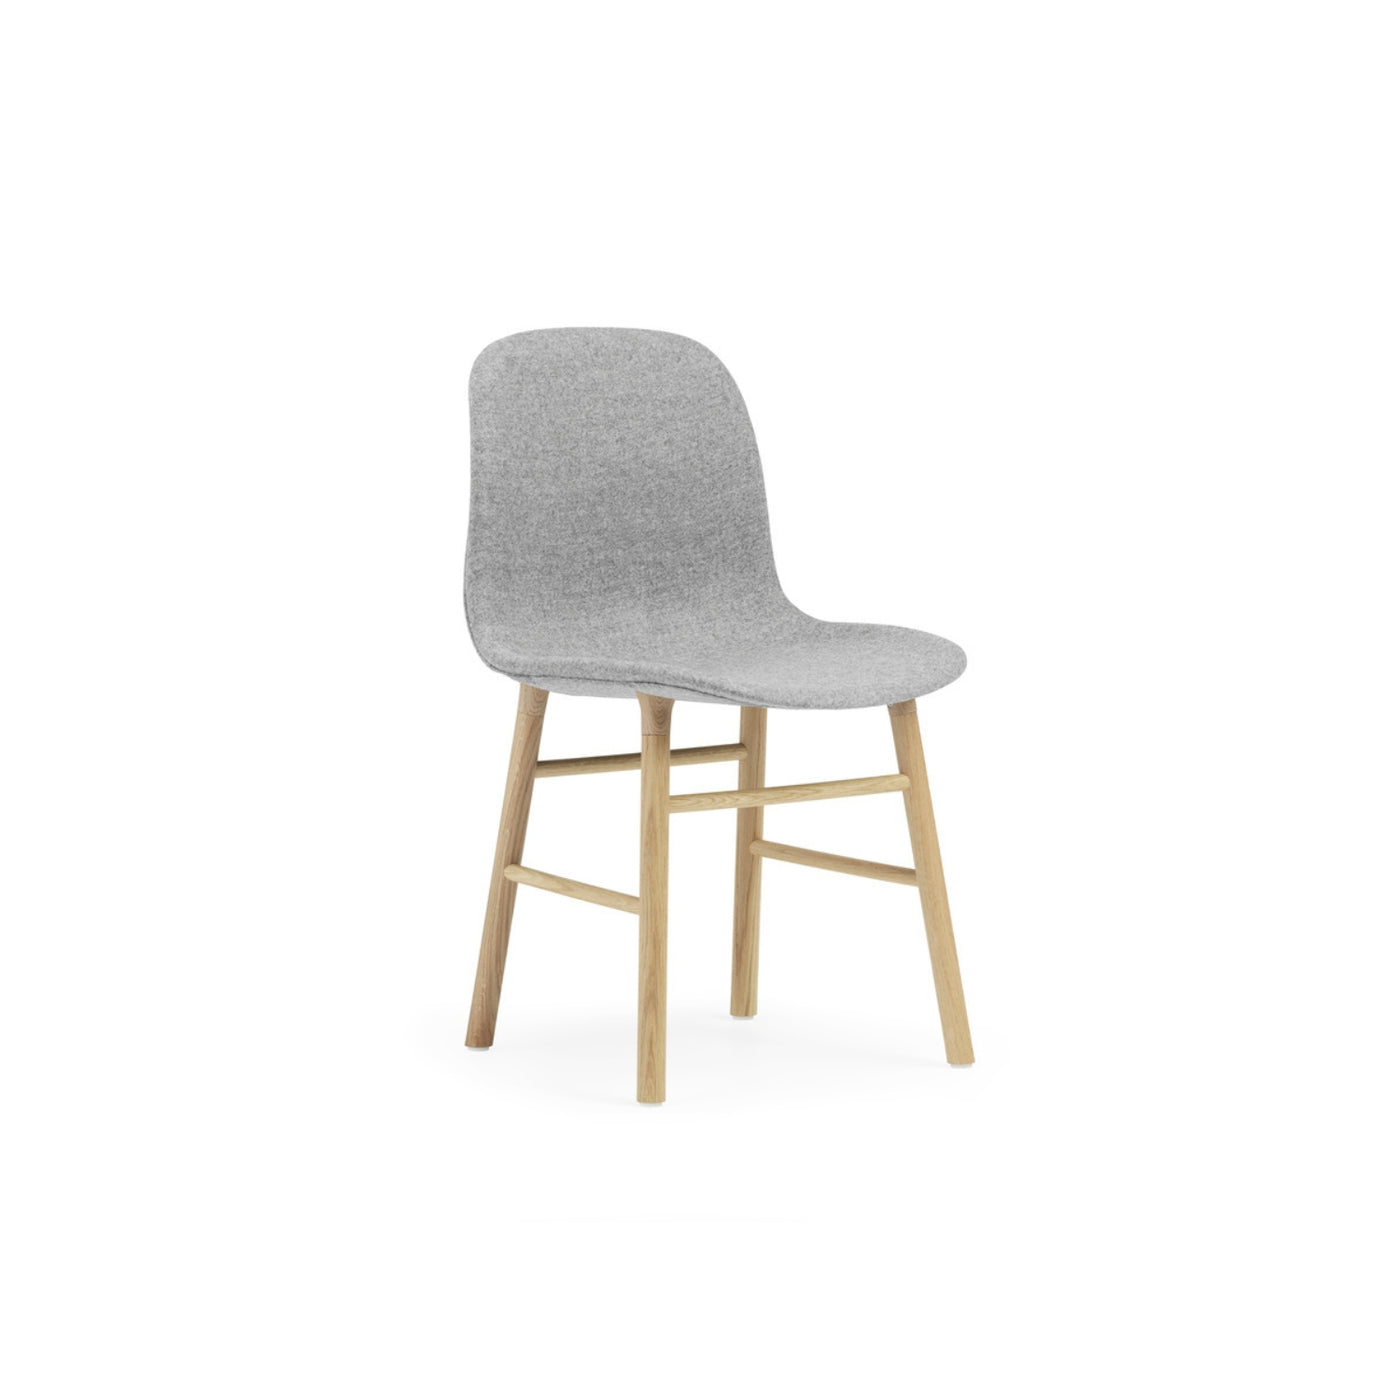 Normann Copenhagen Form Chair Wood at someday designs. #colour_synergy-serendipity